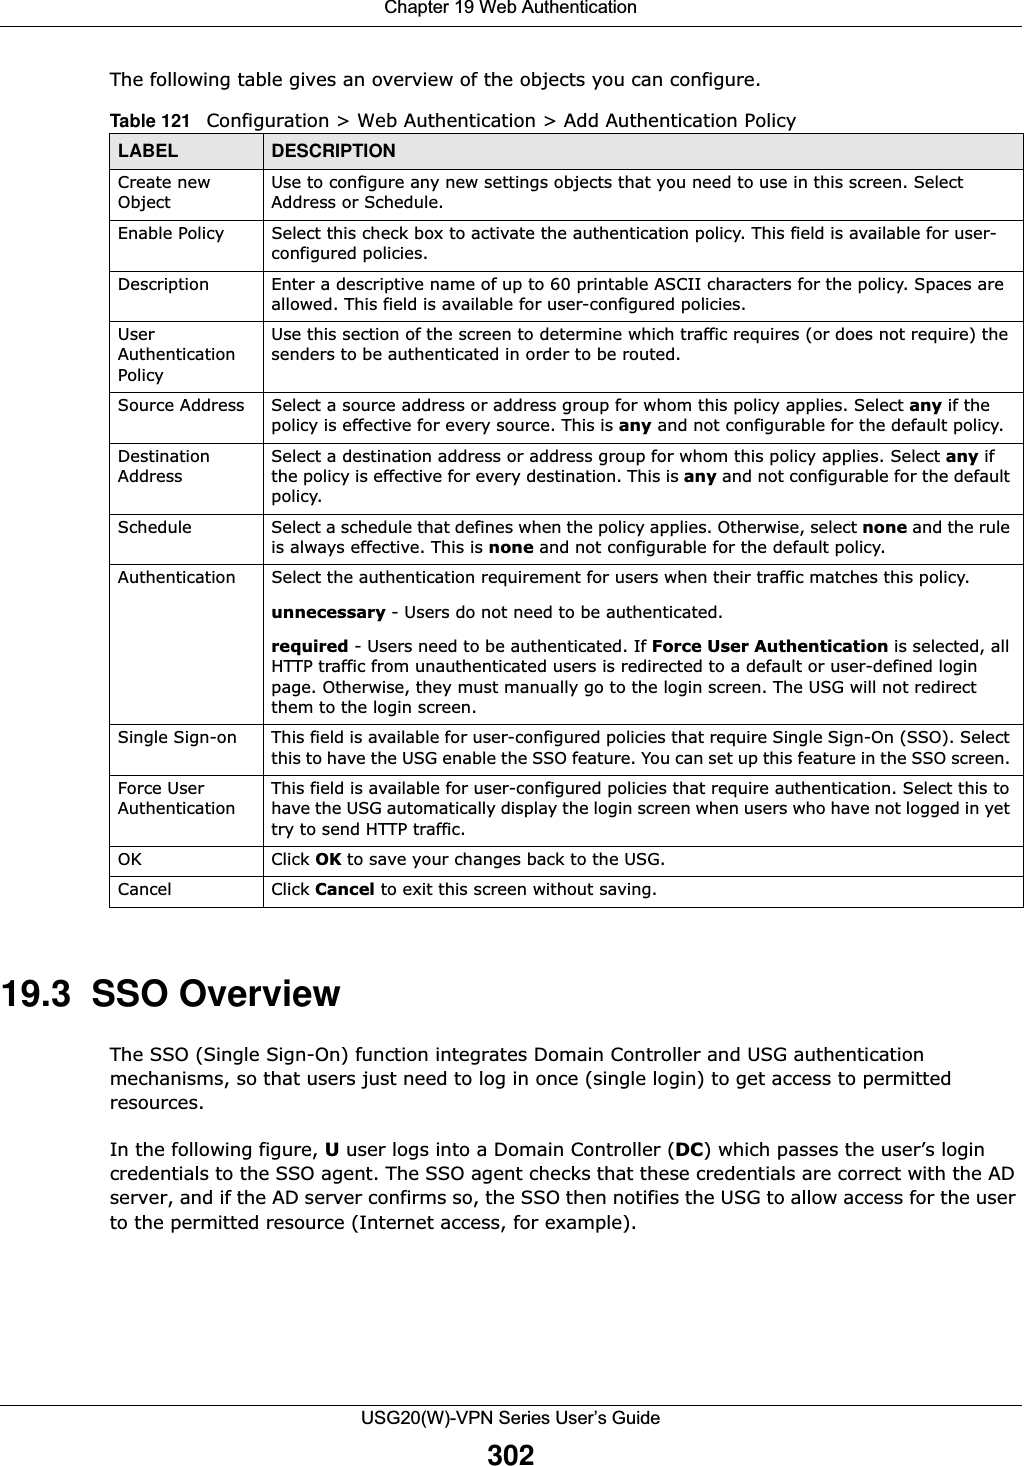 Chapter 19 Web AuthenticationUSG20(W)-VPN Series User’s Guide302The following table gives an overview of the objects you can configure.  19.3  SSO OverviewThe SSO (Single Sign-On) function integrates Domain Controller and USG authentication mechanisms, so that users just need to log in once (single login) to get access to permitted resources.In the following figure, U user logs into a Domain Controller (DC) which passes the user’s login credentials to the SSO agent. The SSO agent checks that these credentials are correct with the AD server, and if the AD server confirms so, the SSO then notifies the USG to allow access for the user to the permitted resource (Internet access, for example).Table 121   Configuration &gt; Web Authentication &gt; Add Authentication Policy  LABEL DESCRIPTIONCreate new ObjectUse to configure any new settings objects that you need to use in this screen. Select Address or Schedule.Enable Policy Select this check box to activate the authentication policy. This field is available for user-configured policies.Description Enter a descriptive name of up to 60 printable ASCII characters for the policy. Spaces are allowed. This field is available for user-configured policies.User Authentication PolicyUse this section of the screen to determine which traffic requires (or does not require) the senders to be authenticated in order to be routed.Source Address Select a source address or address group for whom this policy applies. Select any if the policy is effective for every source. This is any and not configurable for the default policy.Destination AddressSelect a destination address or address group for whom this policy applies. Select any if the policy is effective for every destination. This is any and not configurable for the default policy.Schedule Select a schedule that defines when the policy applies. Otherwise, select none and the rule is always effective. This is none and not configurable for the default policy.Authentication Select the authentication requirement for users when their traffic matches this policy. unnecessary - Users do not need to be authenticated.required - Users need to be authenticated. If Force User Authentication is selected, all HTTP traffic from unauthenticated users is redirected to a default or user-defined login page. Otherwise, they must manually go to the login screen. The USG will not redirect them to the login screen.Single Sign-on This field is available for user-configured policies that require Single Sign-On (SSO). Select this to have the USG enable the SSO feature. You can set up this feature in the SSO screen. Force User AuthenticationThis field is available for user-configured policies that require authentication. Select this to have the USG automatically display the login screen when users who have not logged in yet try to send HTTP traffic. OK Click OK to save your changes back to the USG.Cancel Click Cancel to exit this screen without saving.